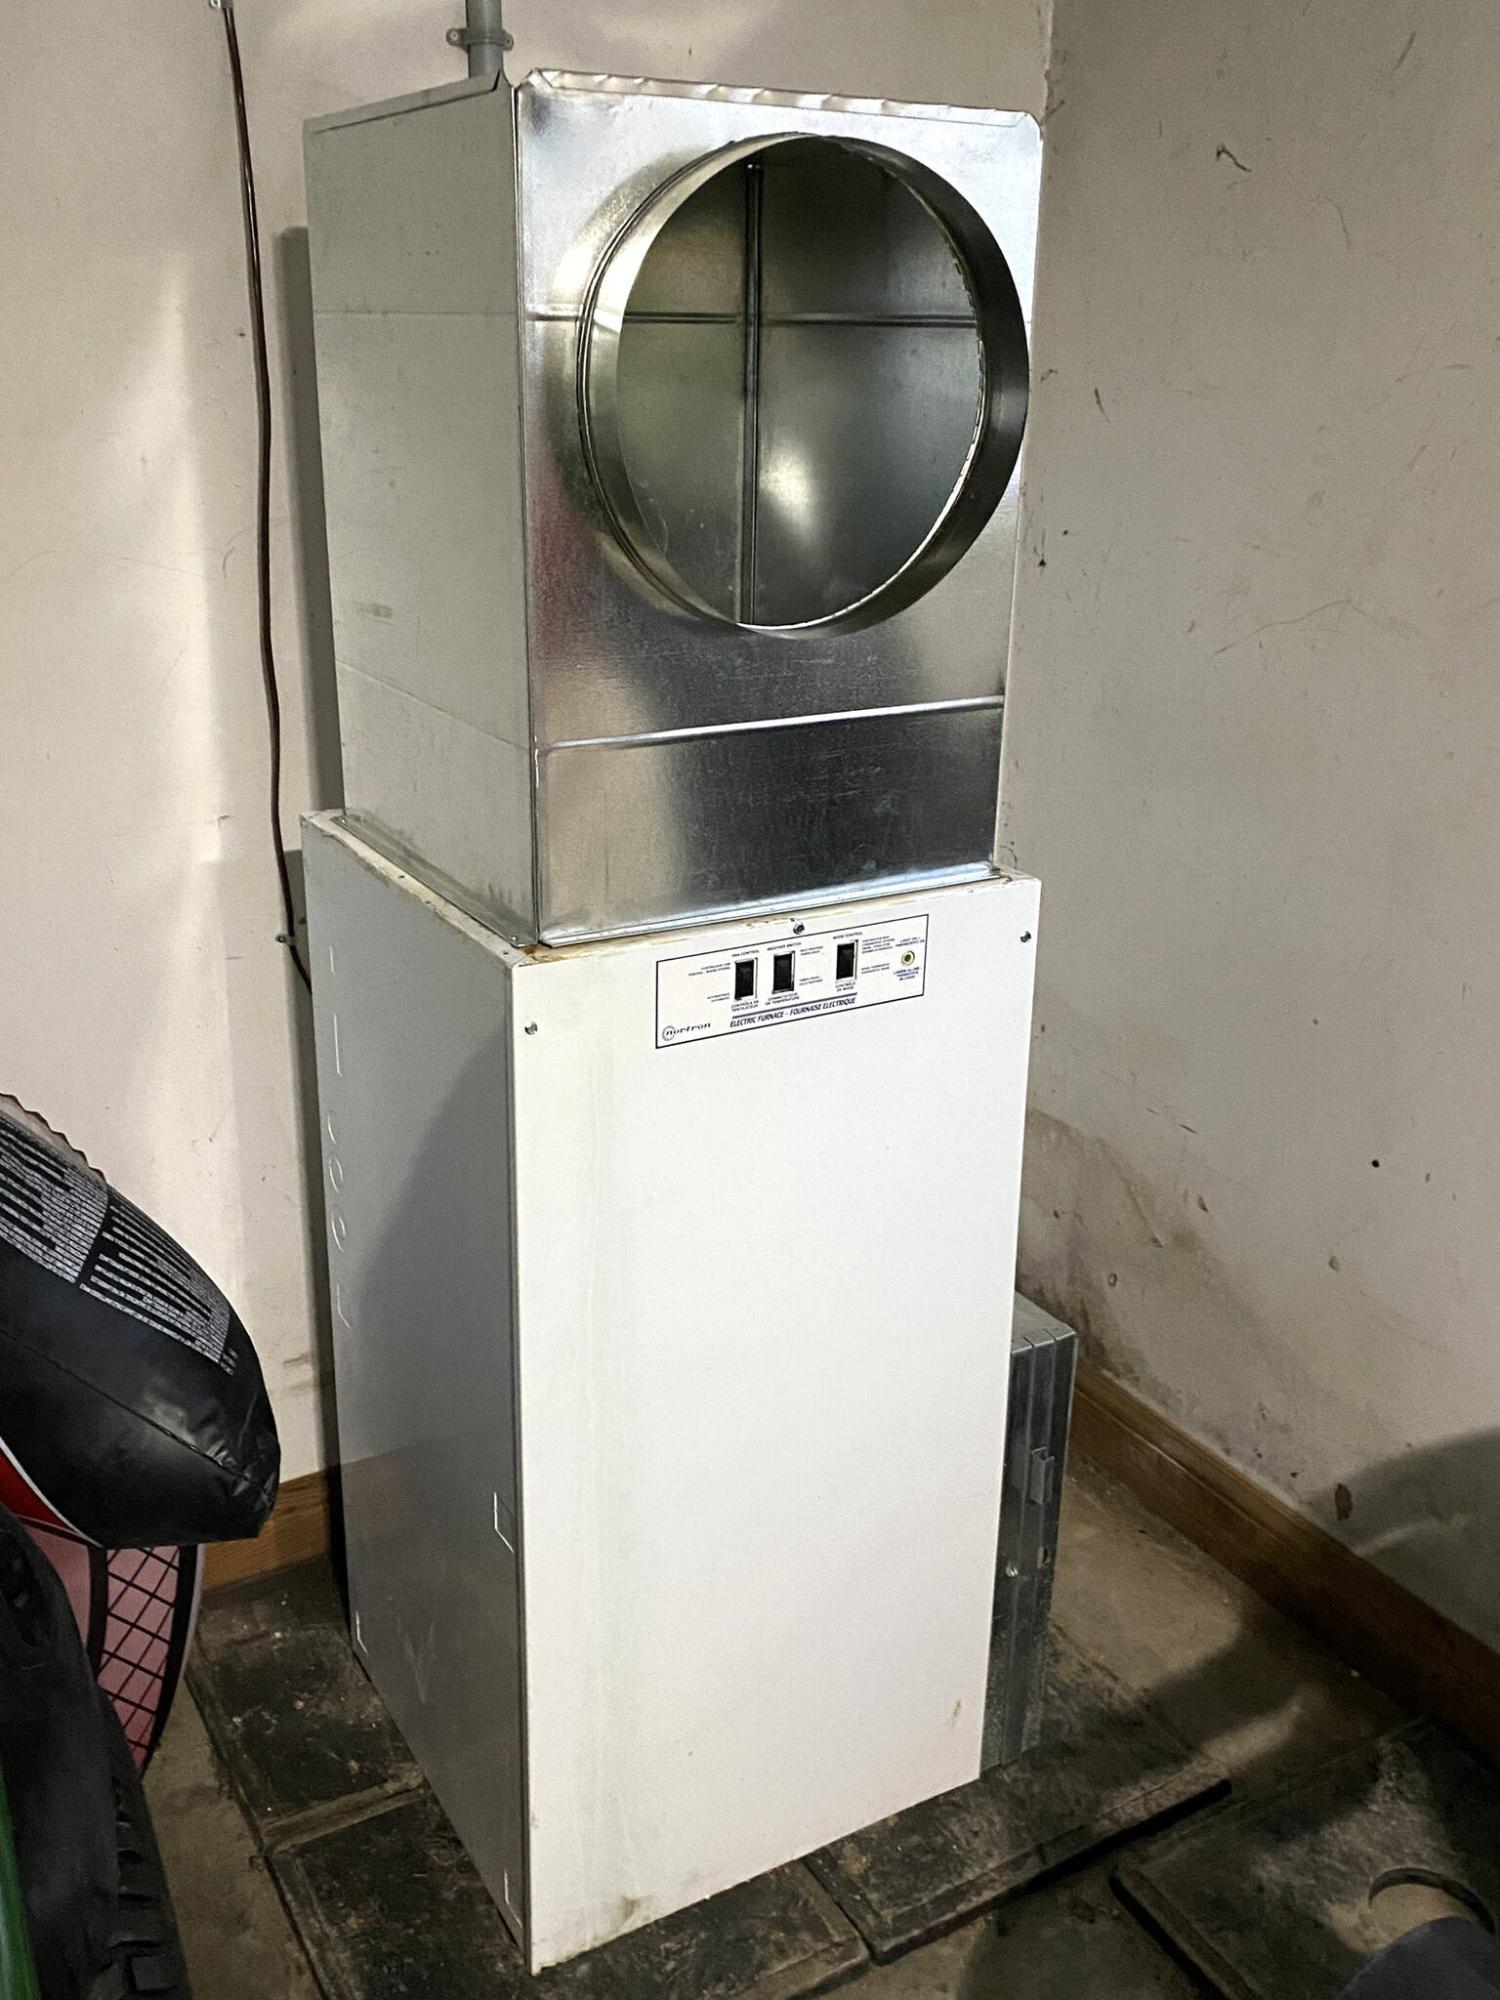  <p>Marc LaBossiere / Winnipeg Free Press</p>
                                <p>This nearly 40-year-old electric furnace found a new home in one of the garage stalls.</p> 